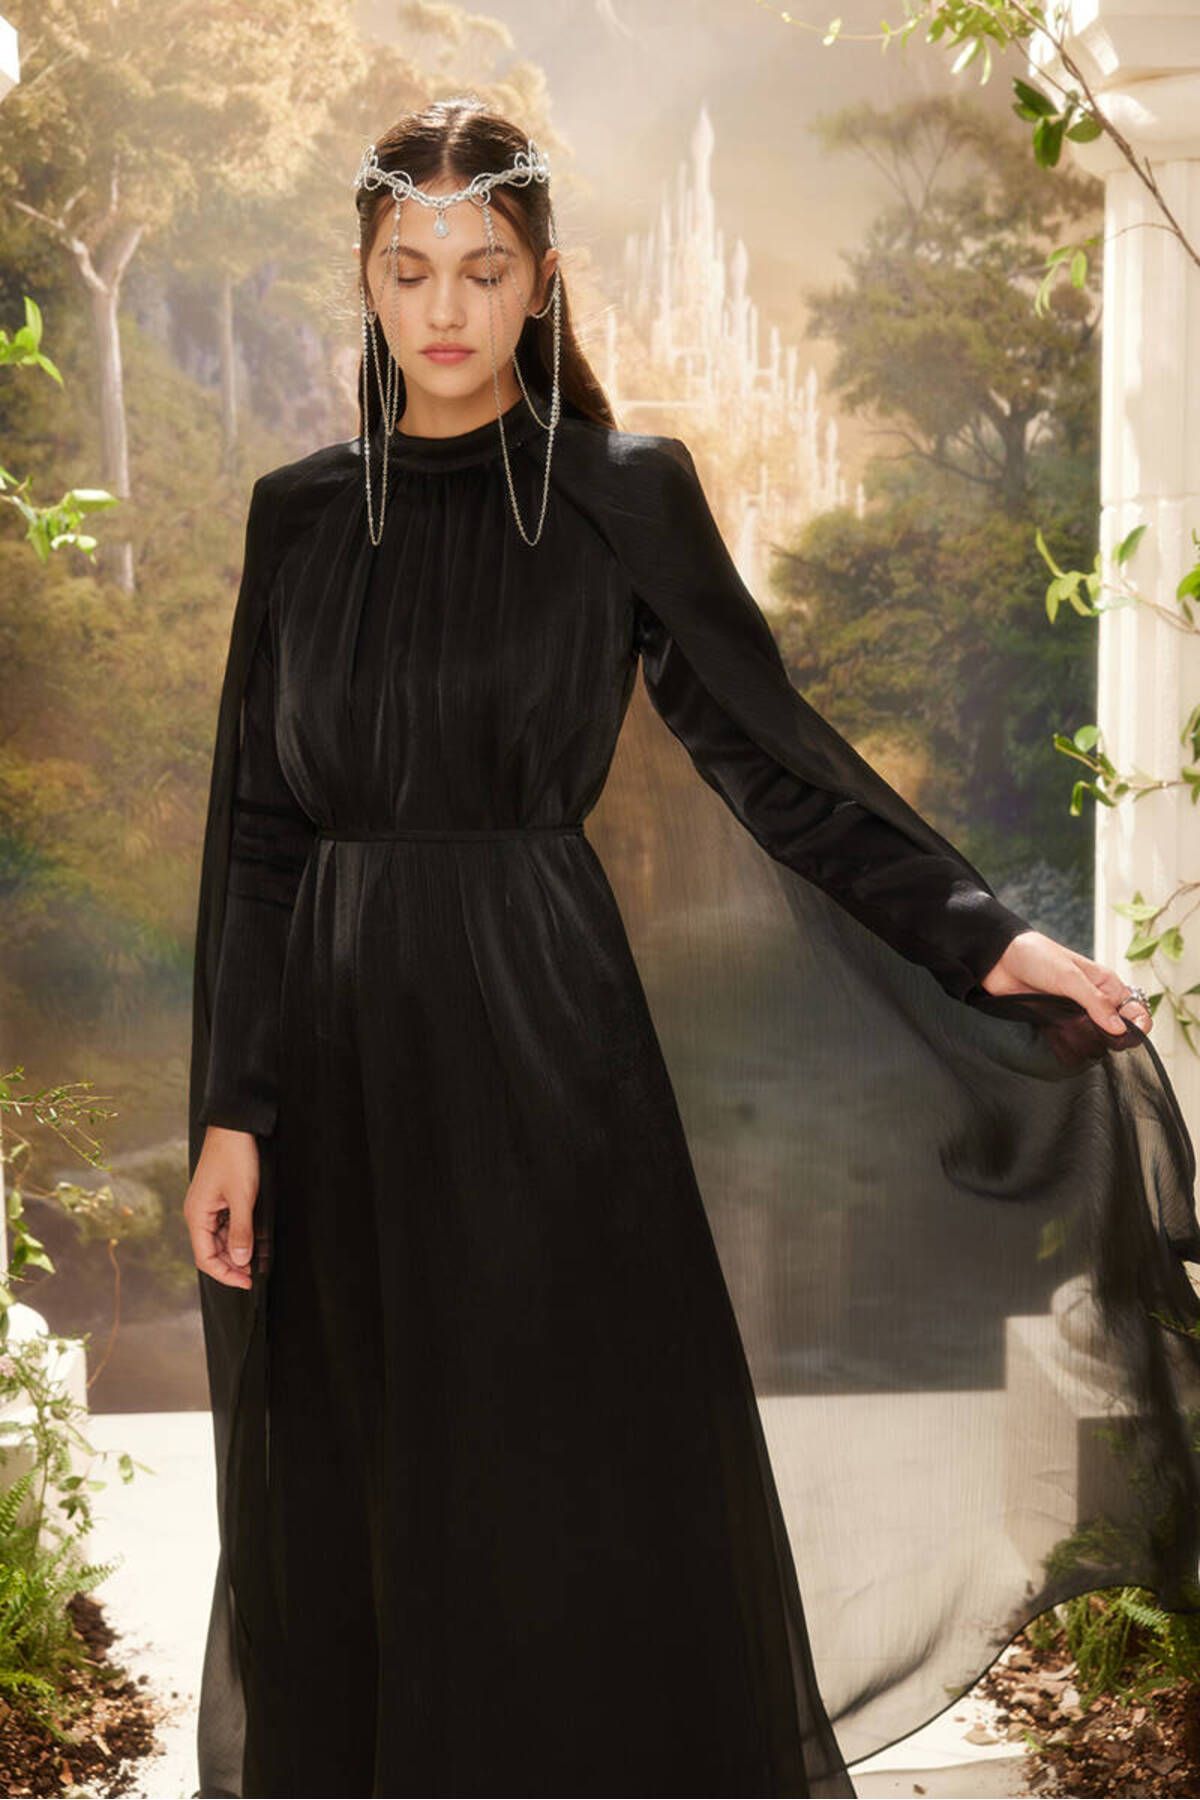 Alex Perry Bradford Cape-sleeve Crepe Gown in Black | Lyst